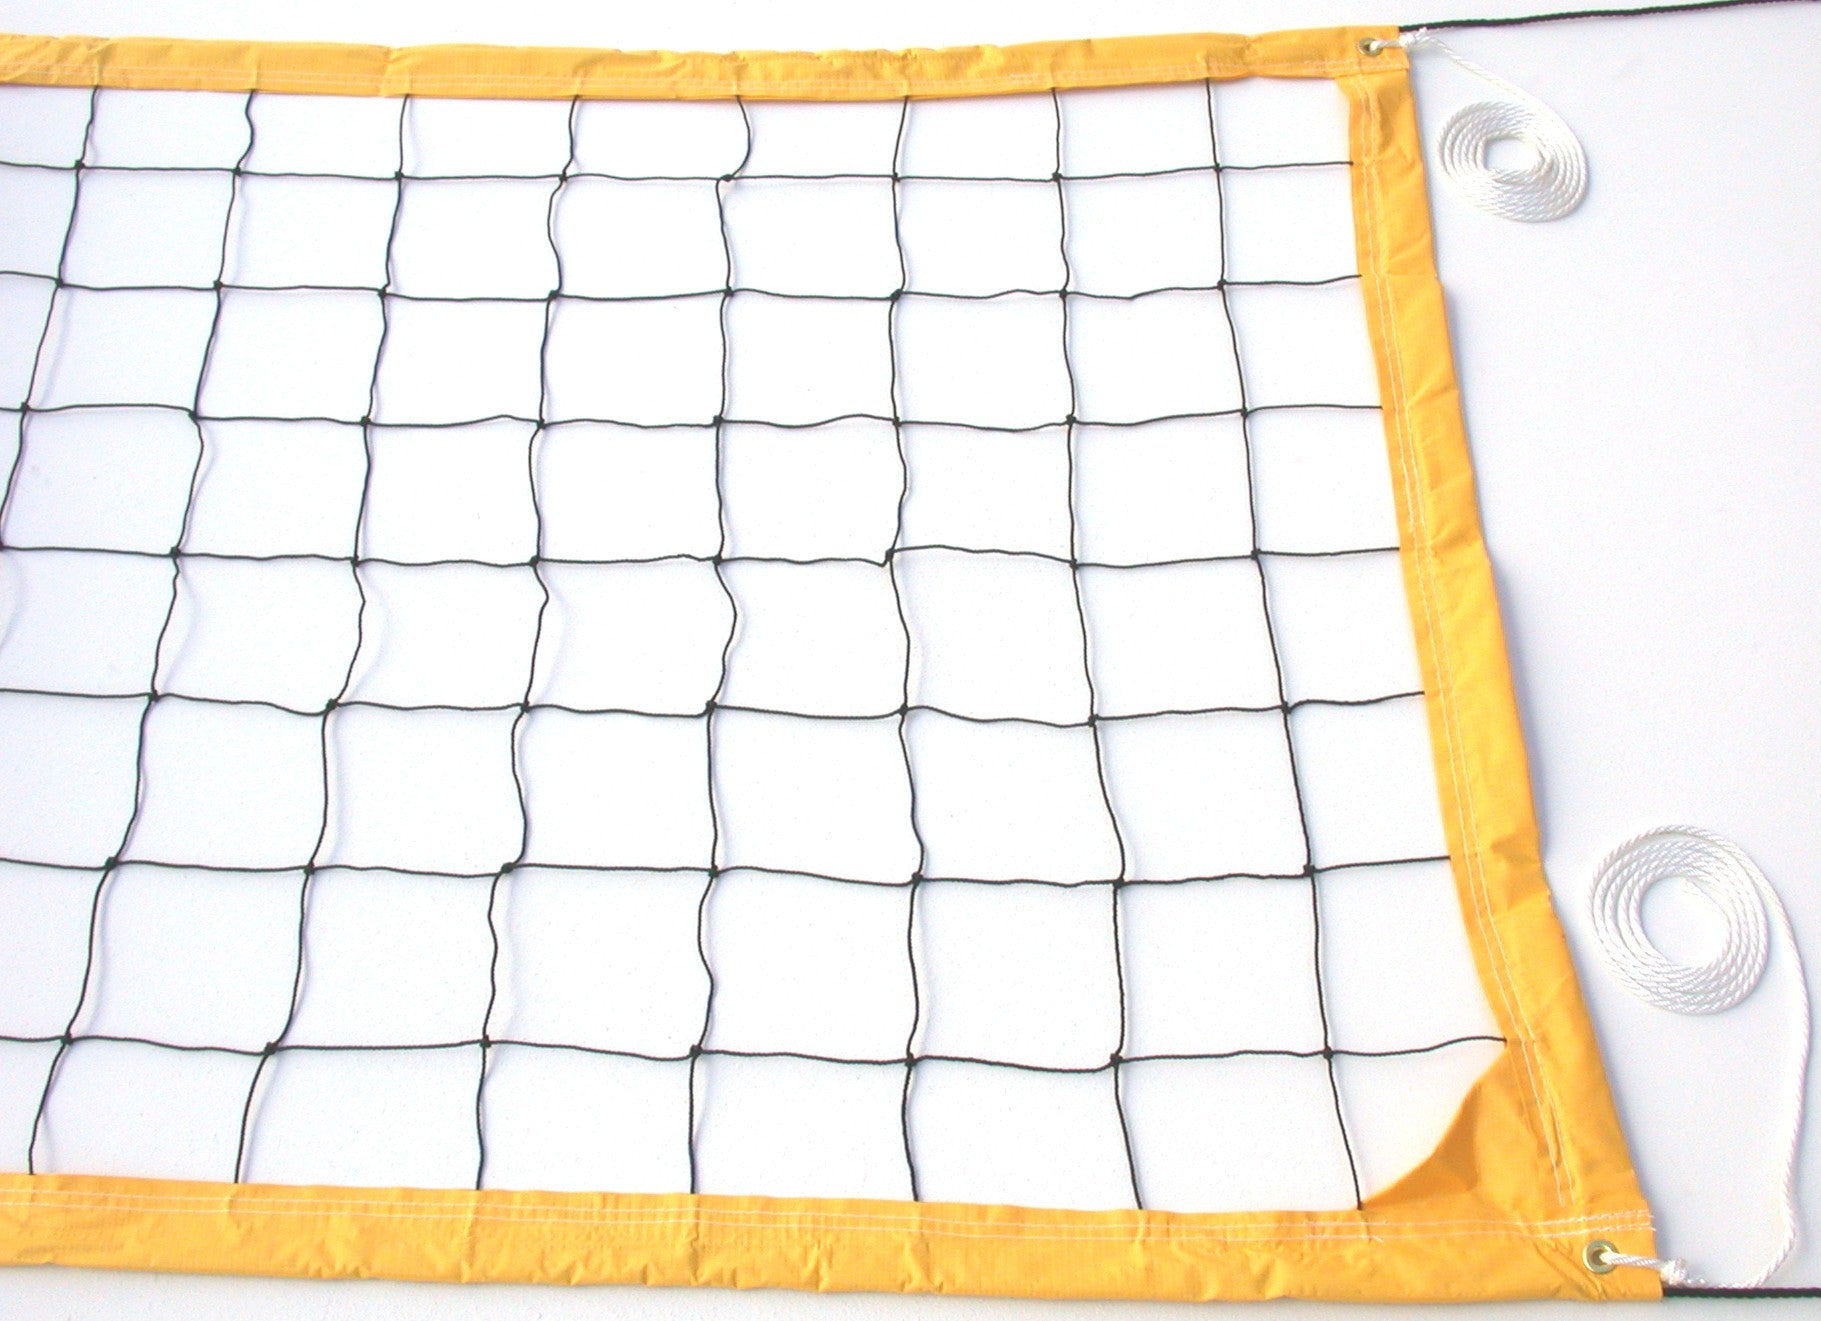 VRRY-Deluxe Volleyball Net Twisted Rope Yellow Vinyl